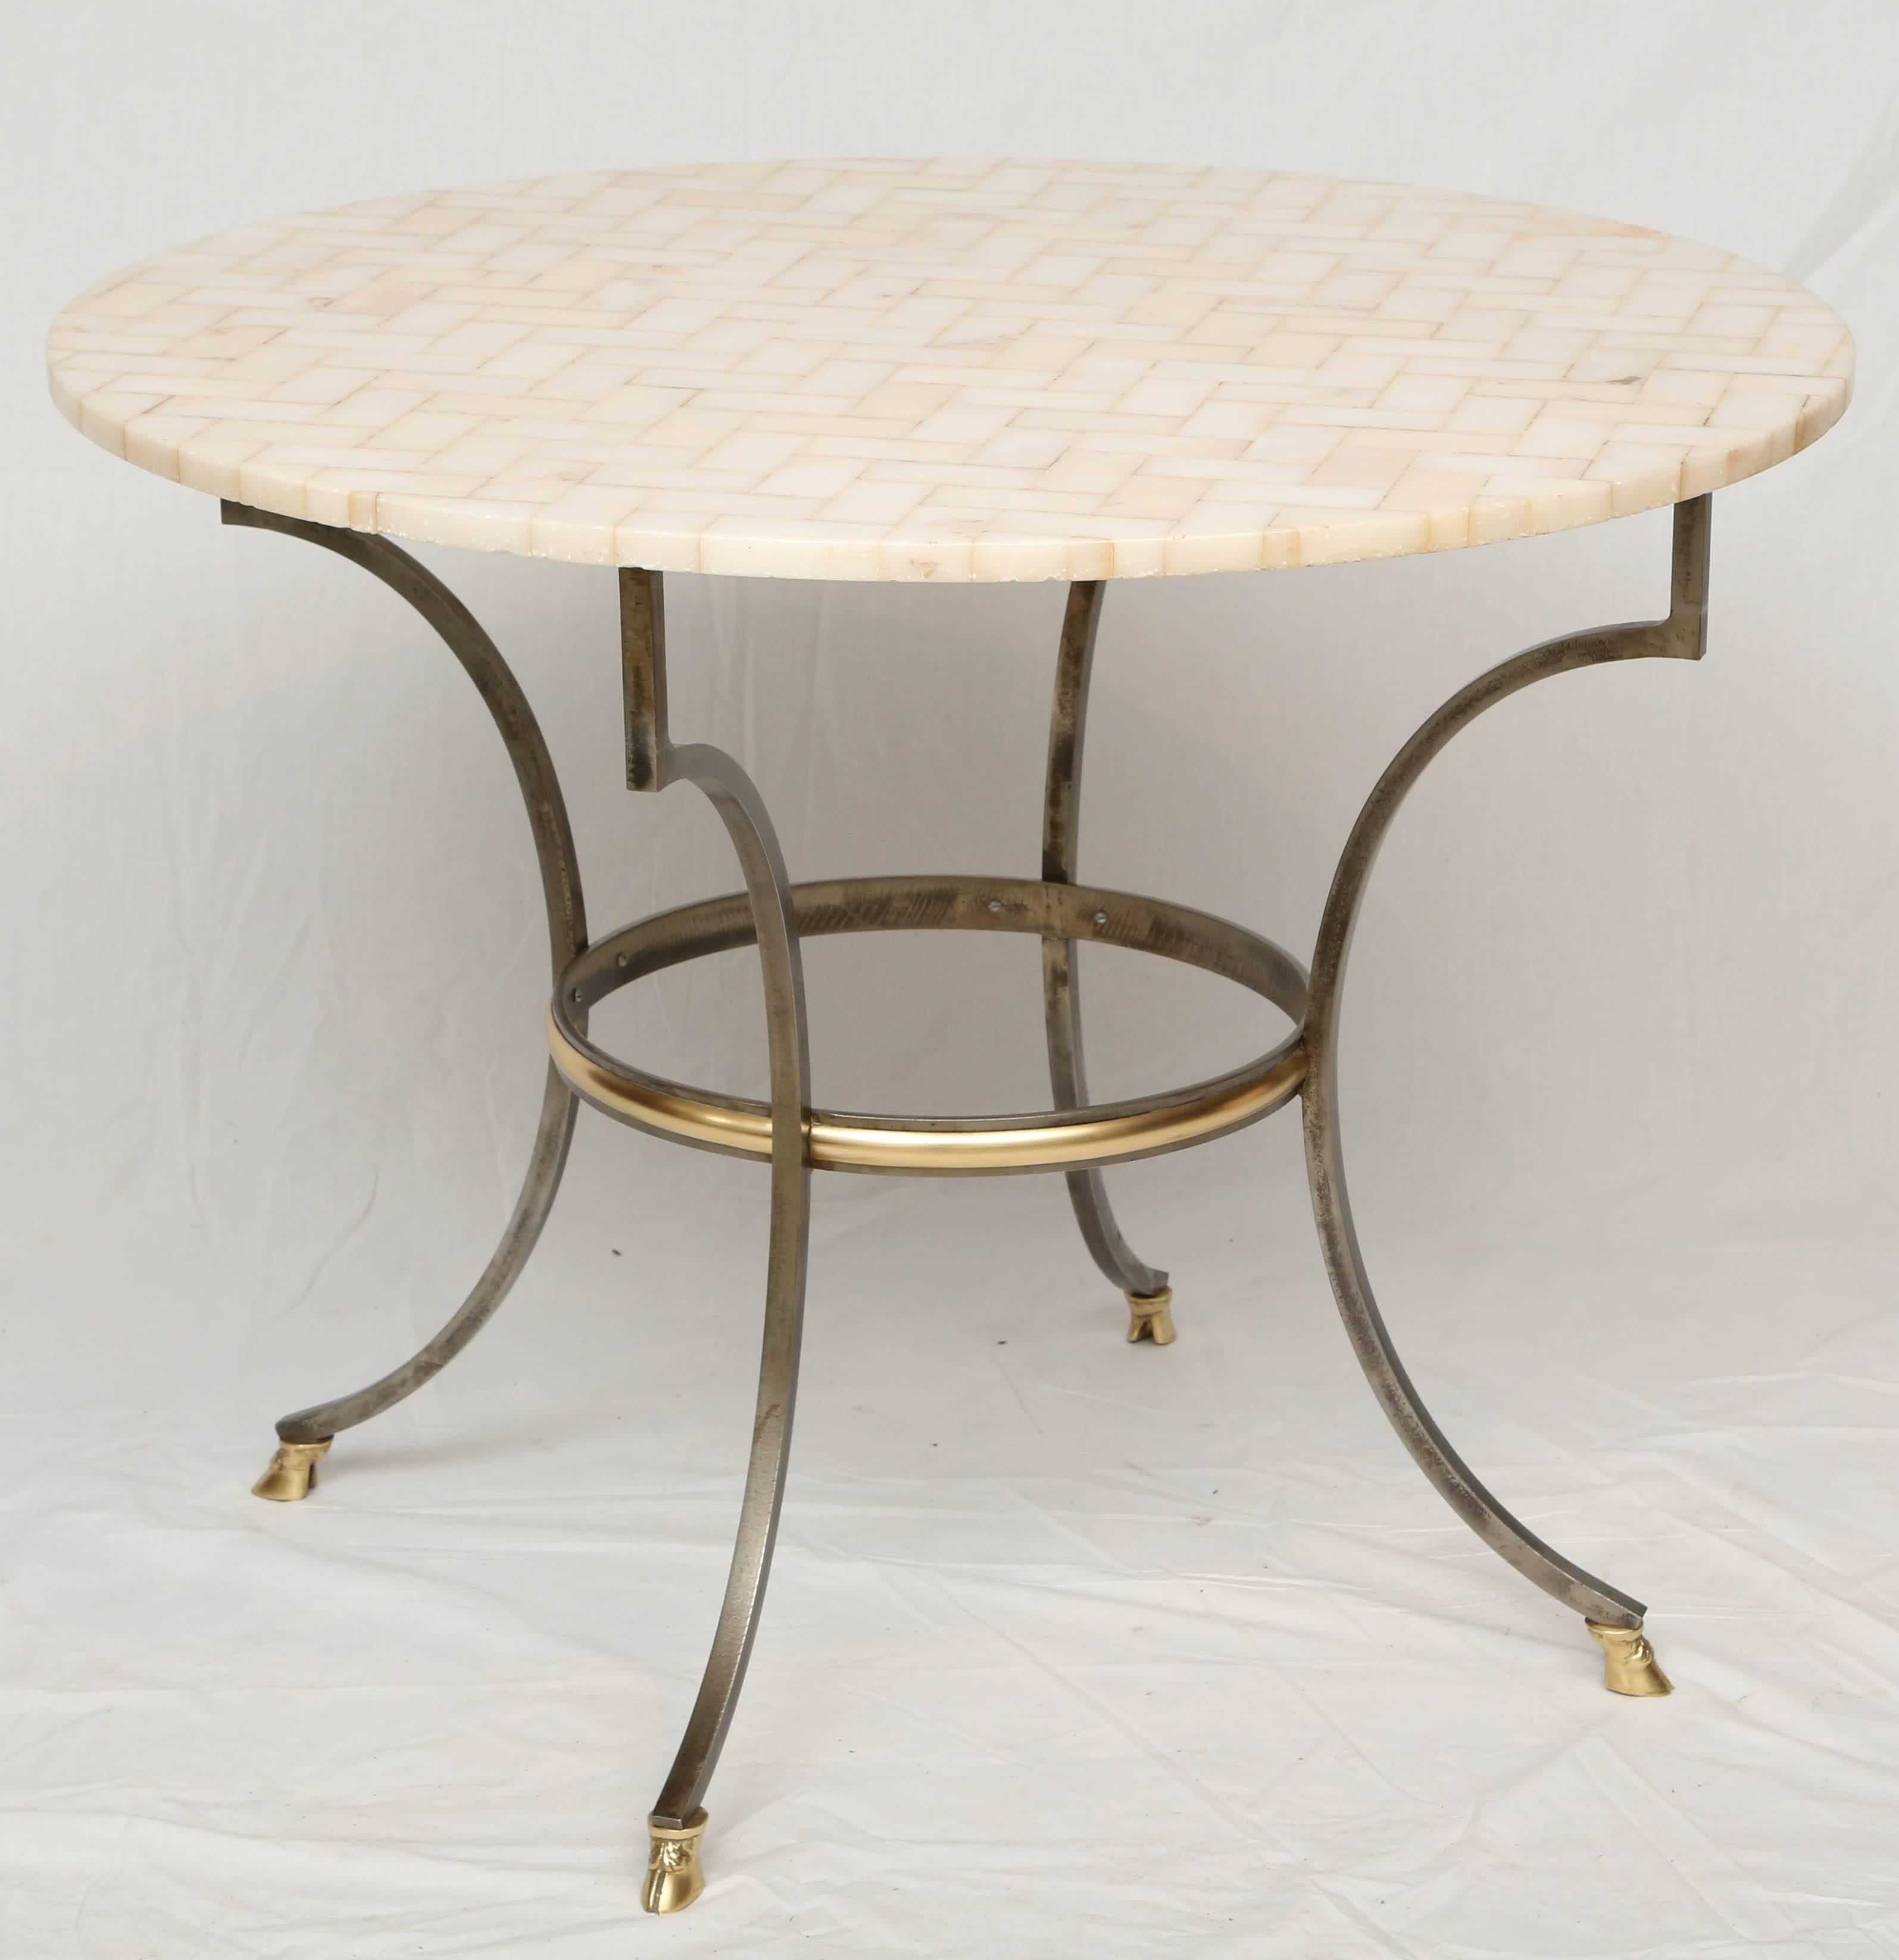 Mid-20th Century Steel and Brass Table with Basketweave Marble Top